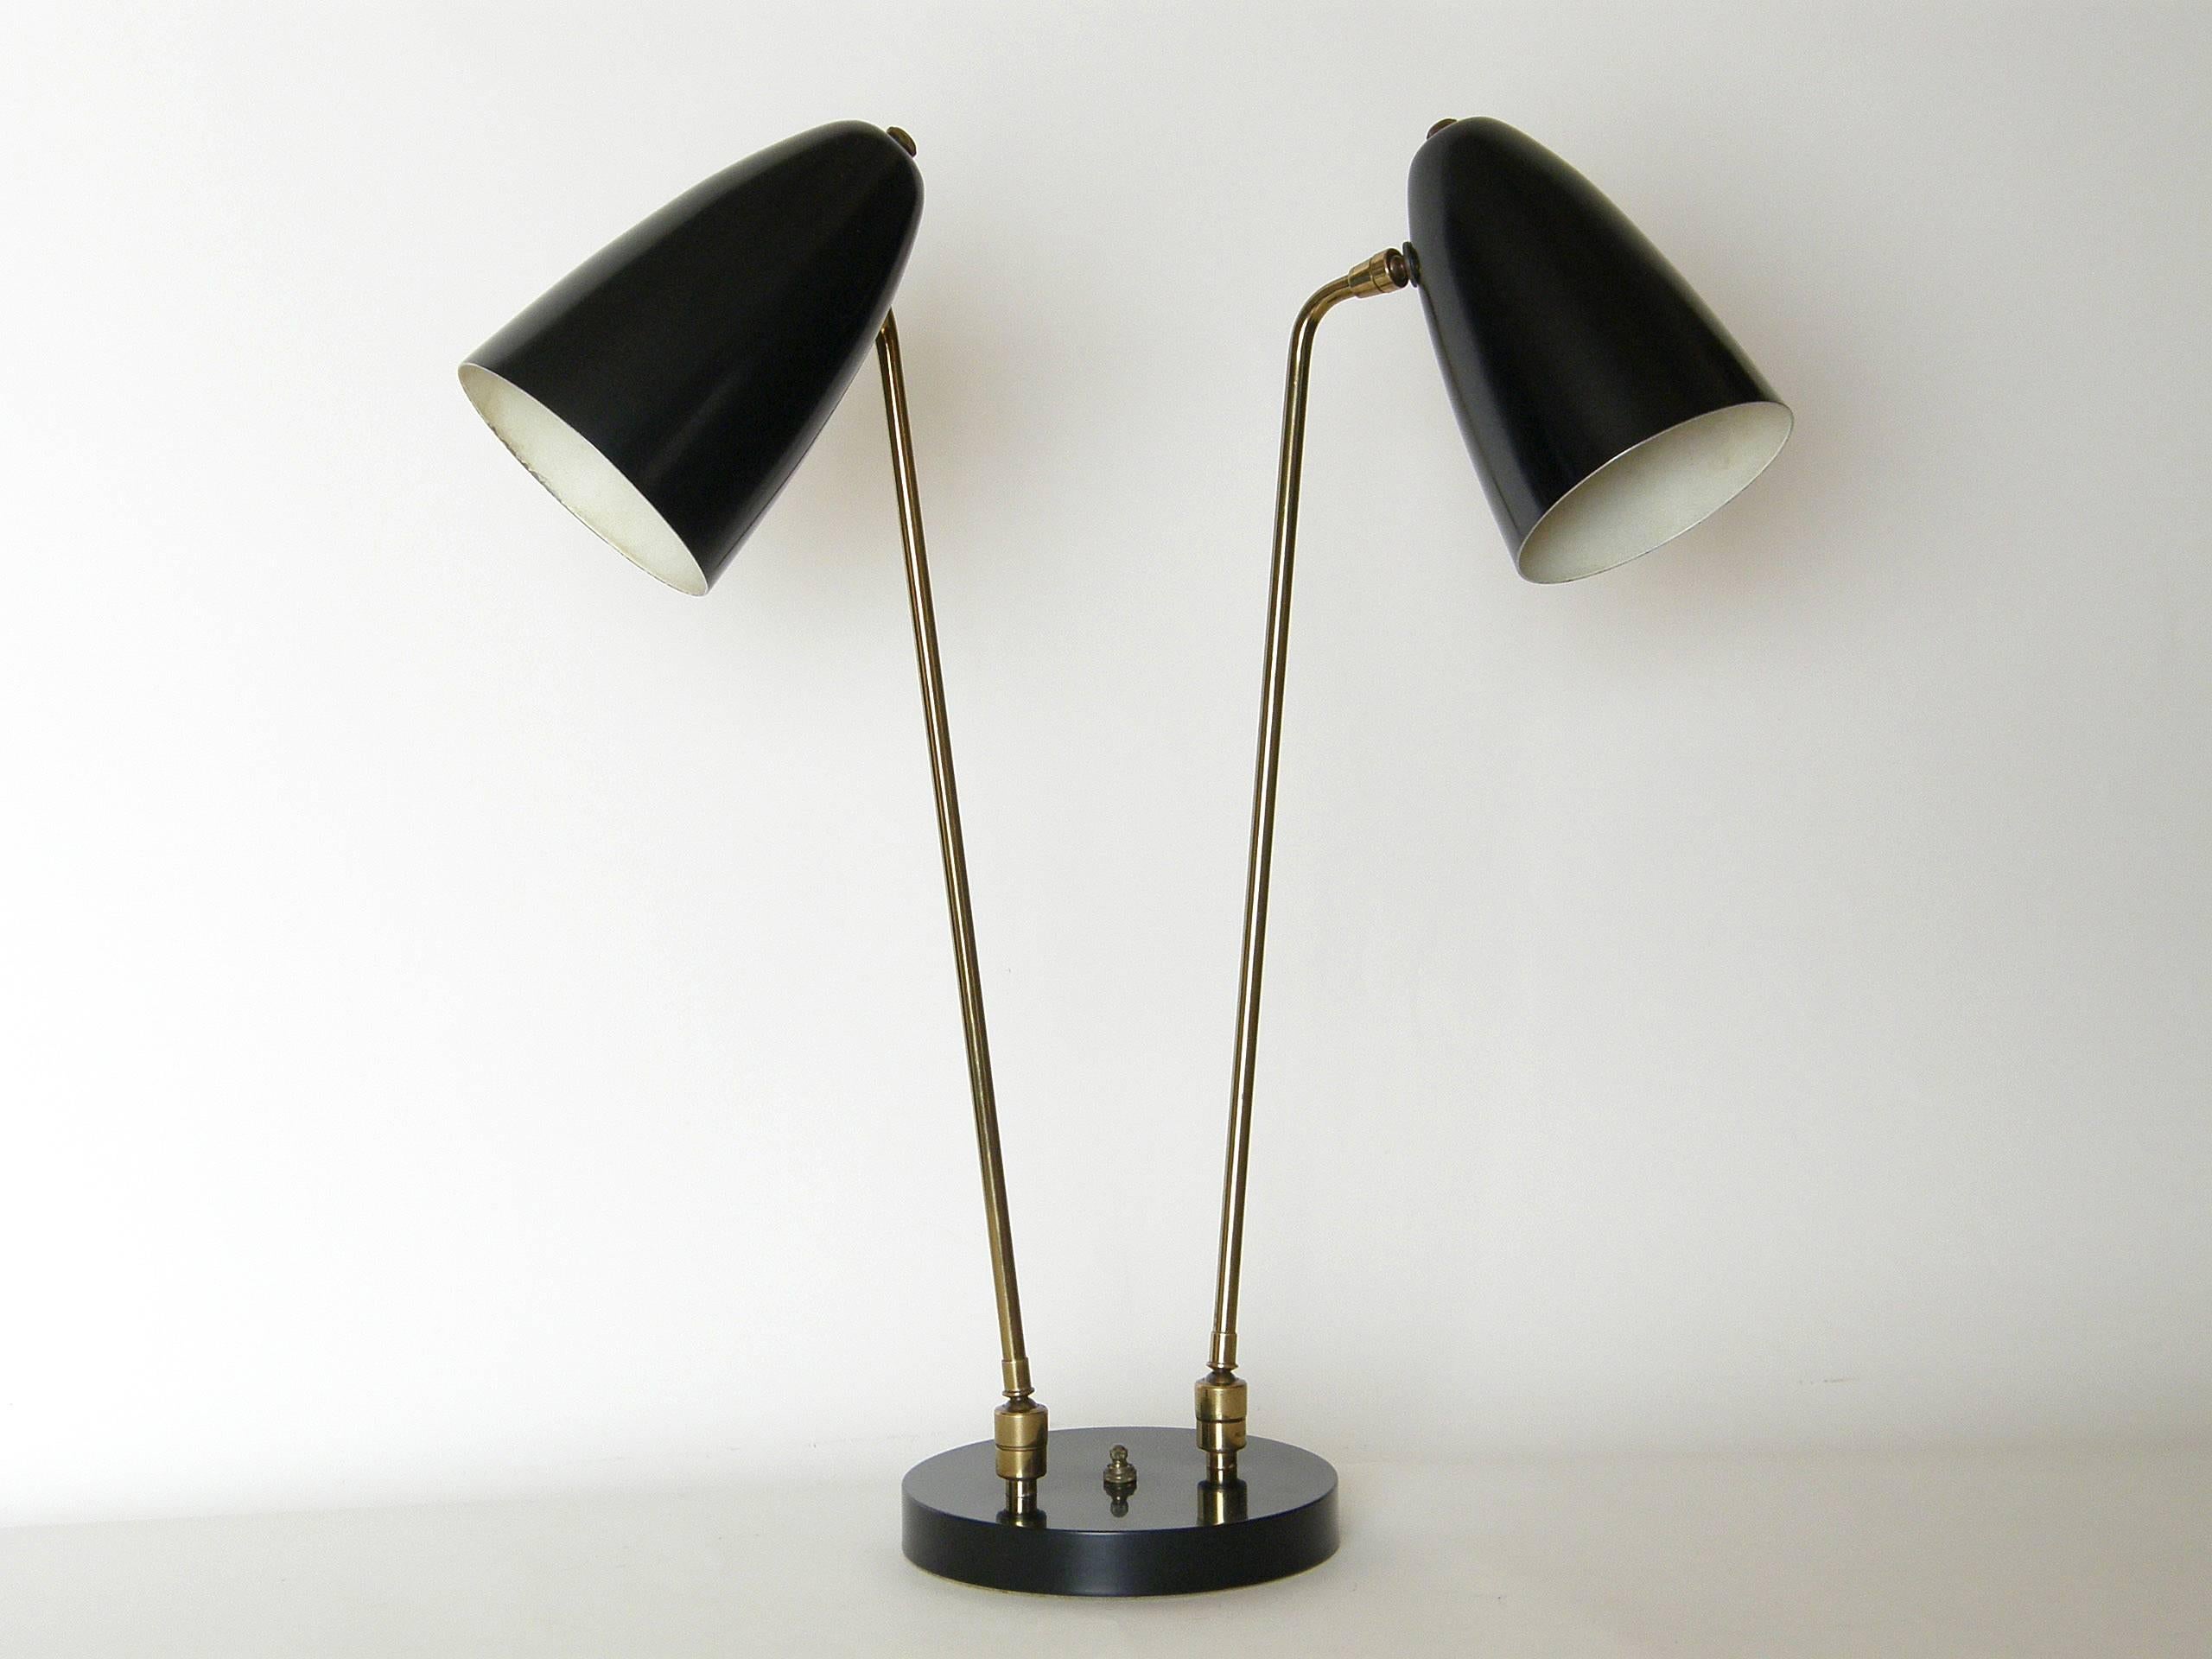 This versatile table lamp was designed by Ben Seibel, circa 1951, and sold through Raymor. The long arms have pivoting ball and socket joints at both the base ends and the points of attachment to the cone shaped shades. This gives the lamp a wide